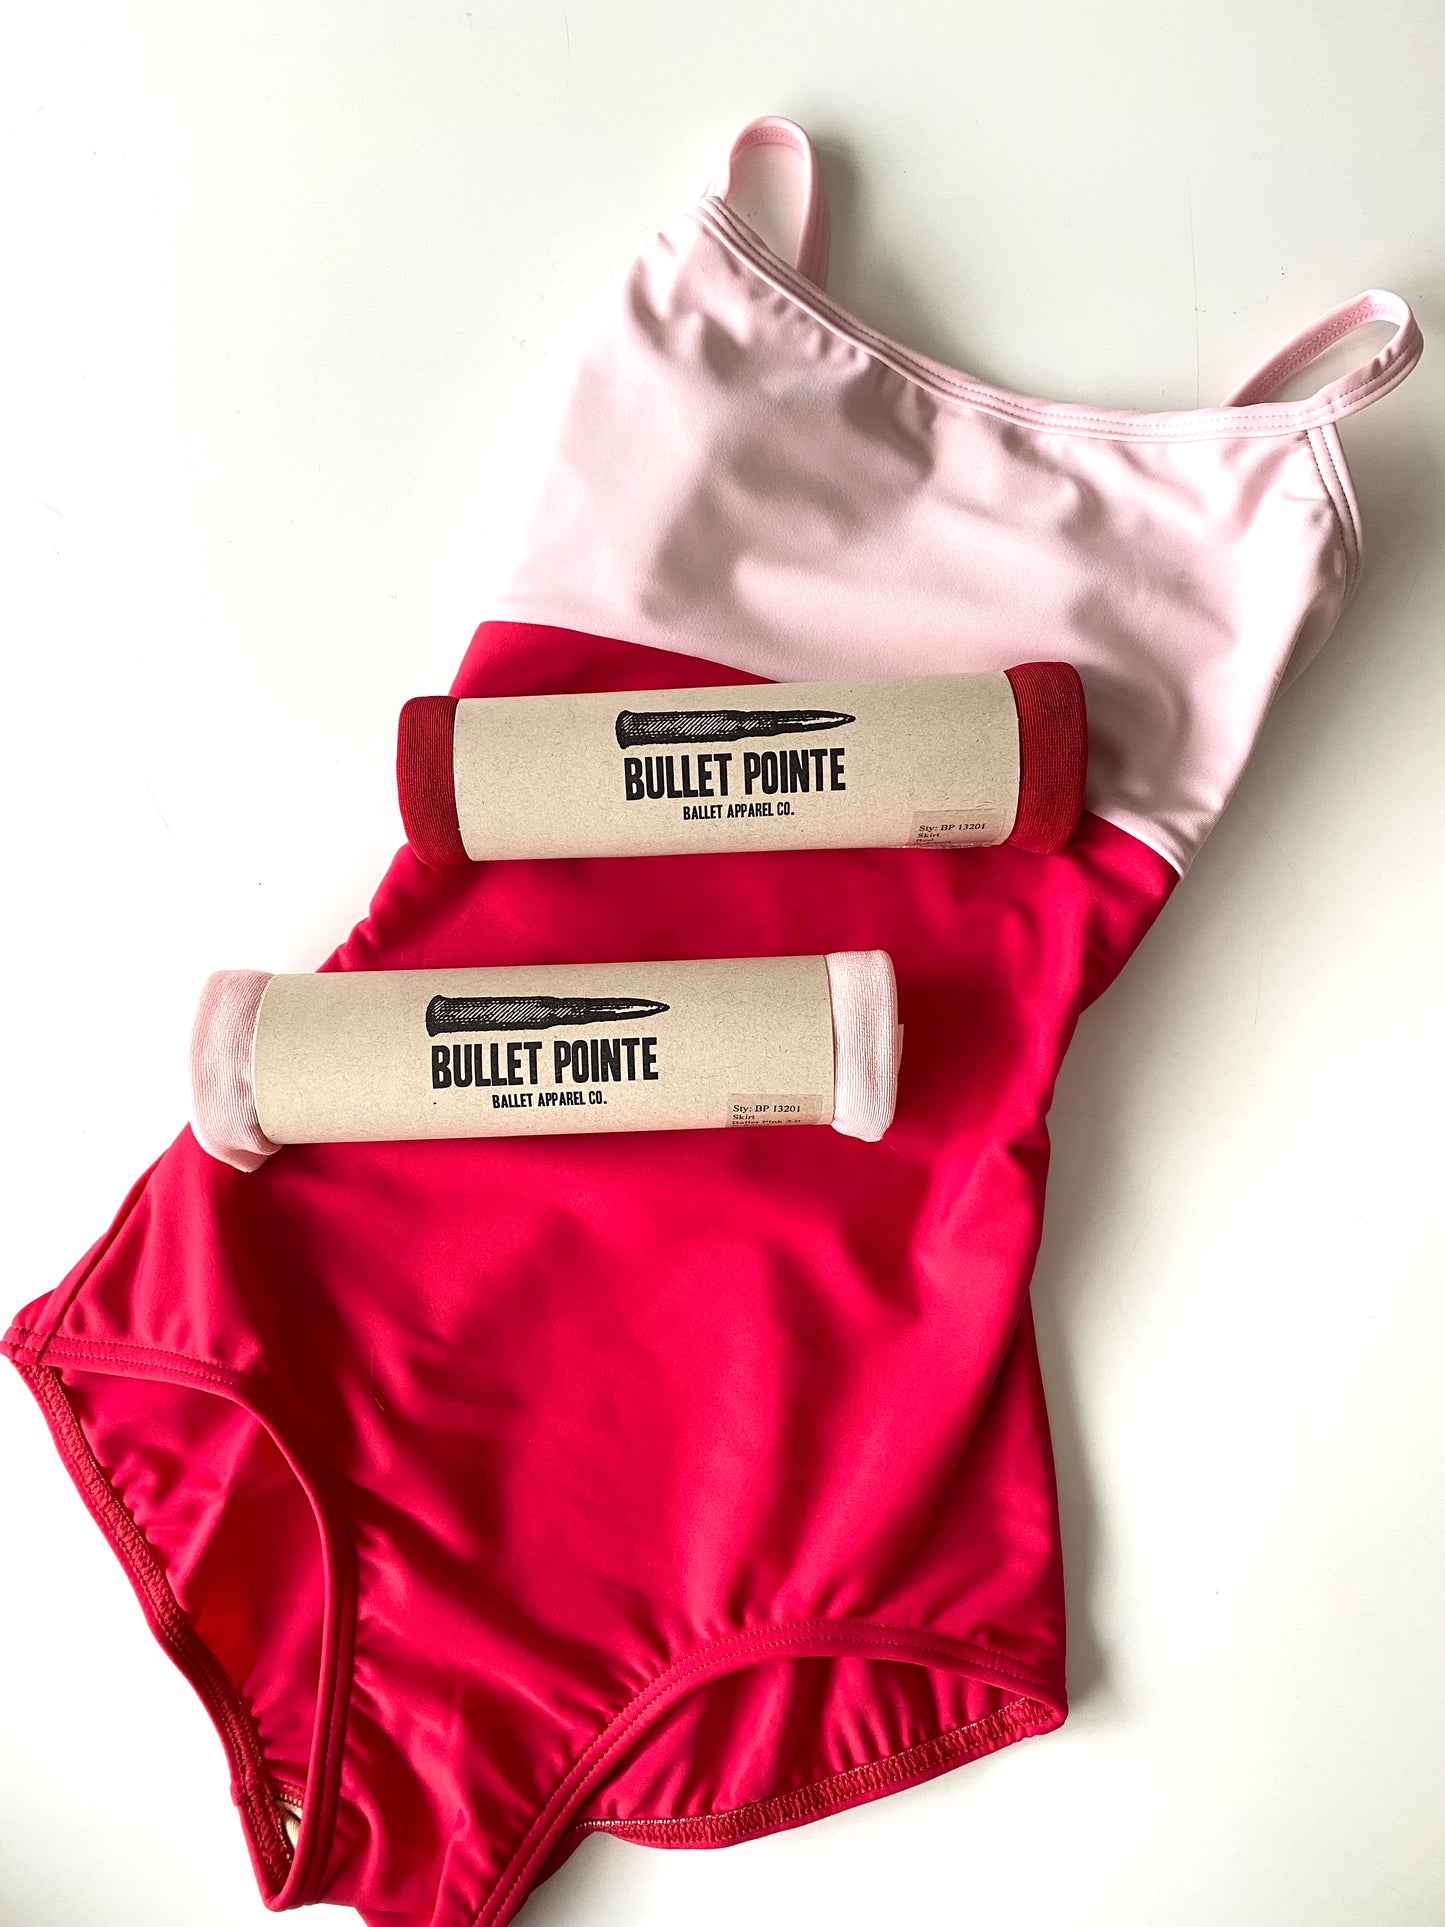 Colette ballet dance camisole leotard in block colours from Supertone sold by The Collective Dancewear